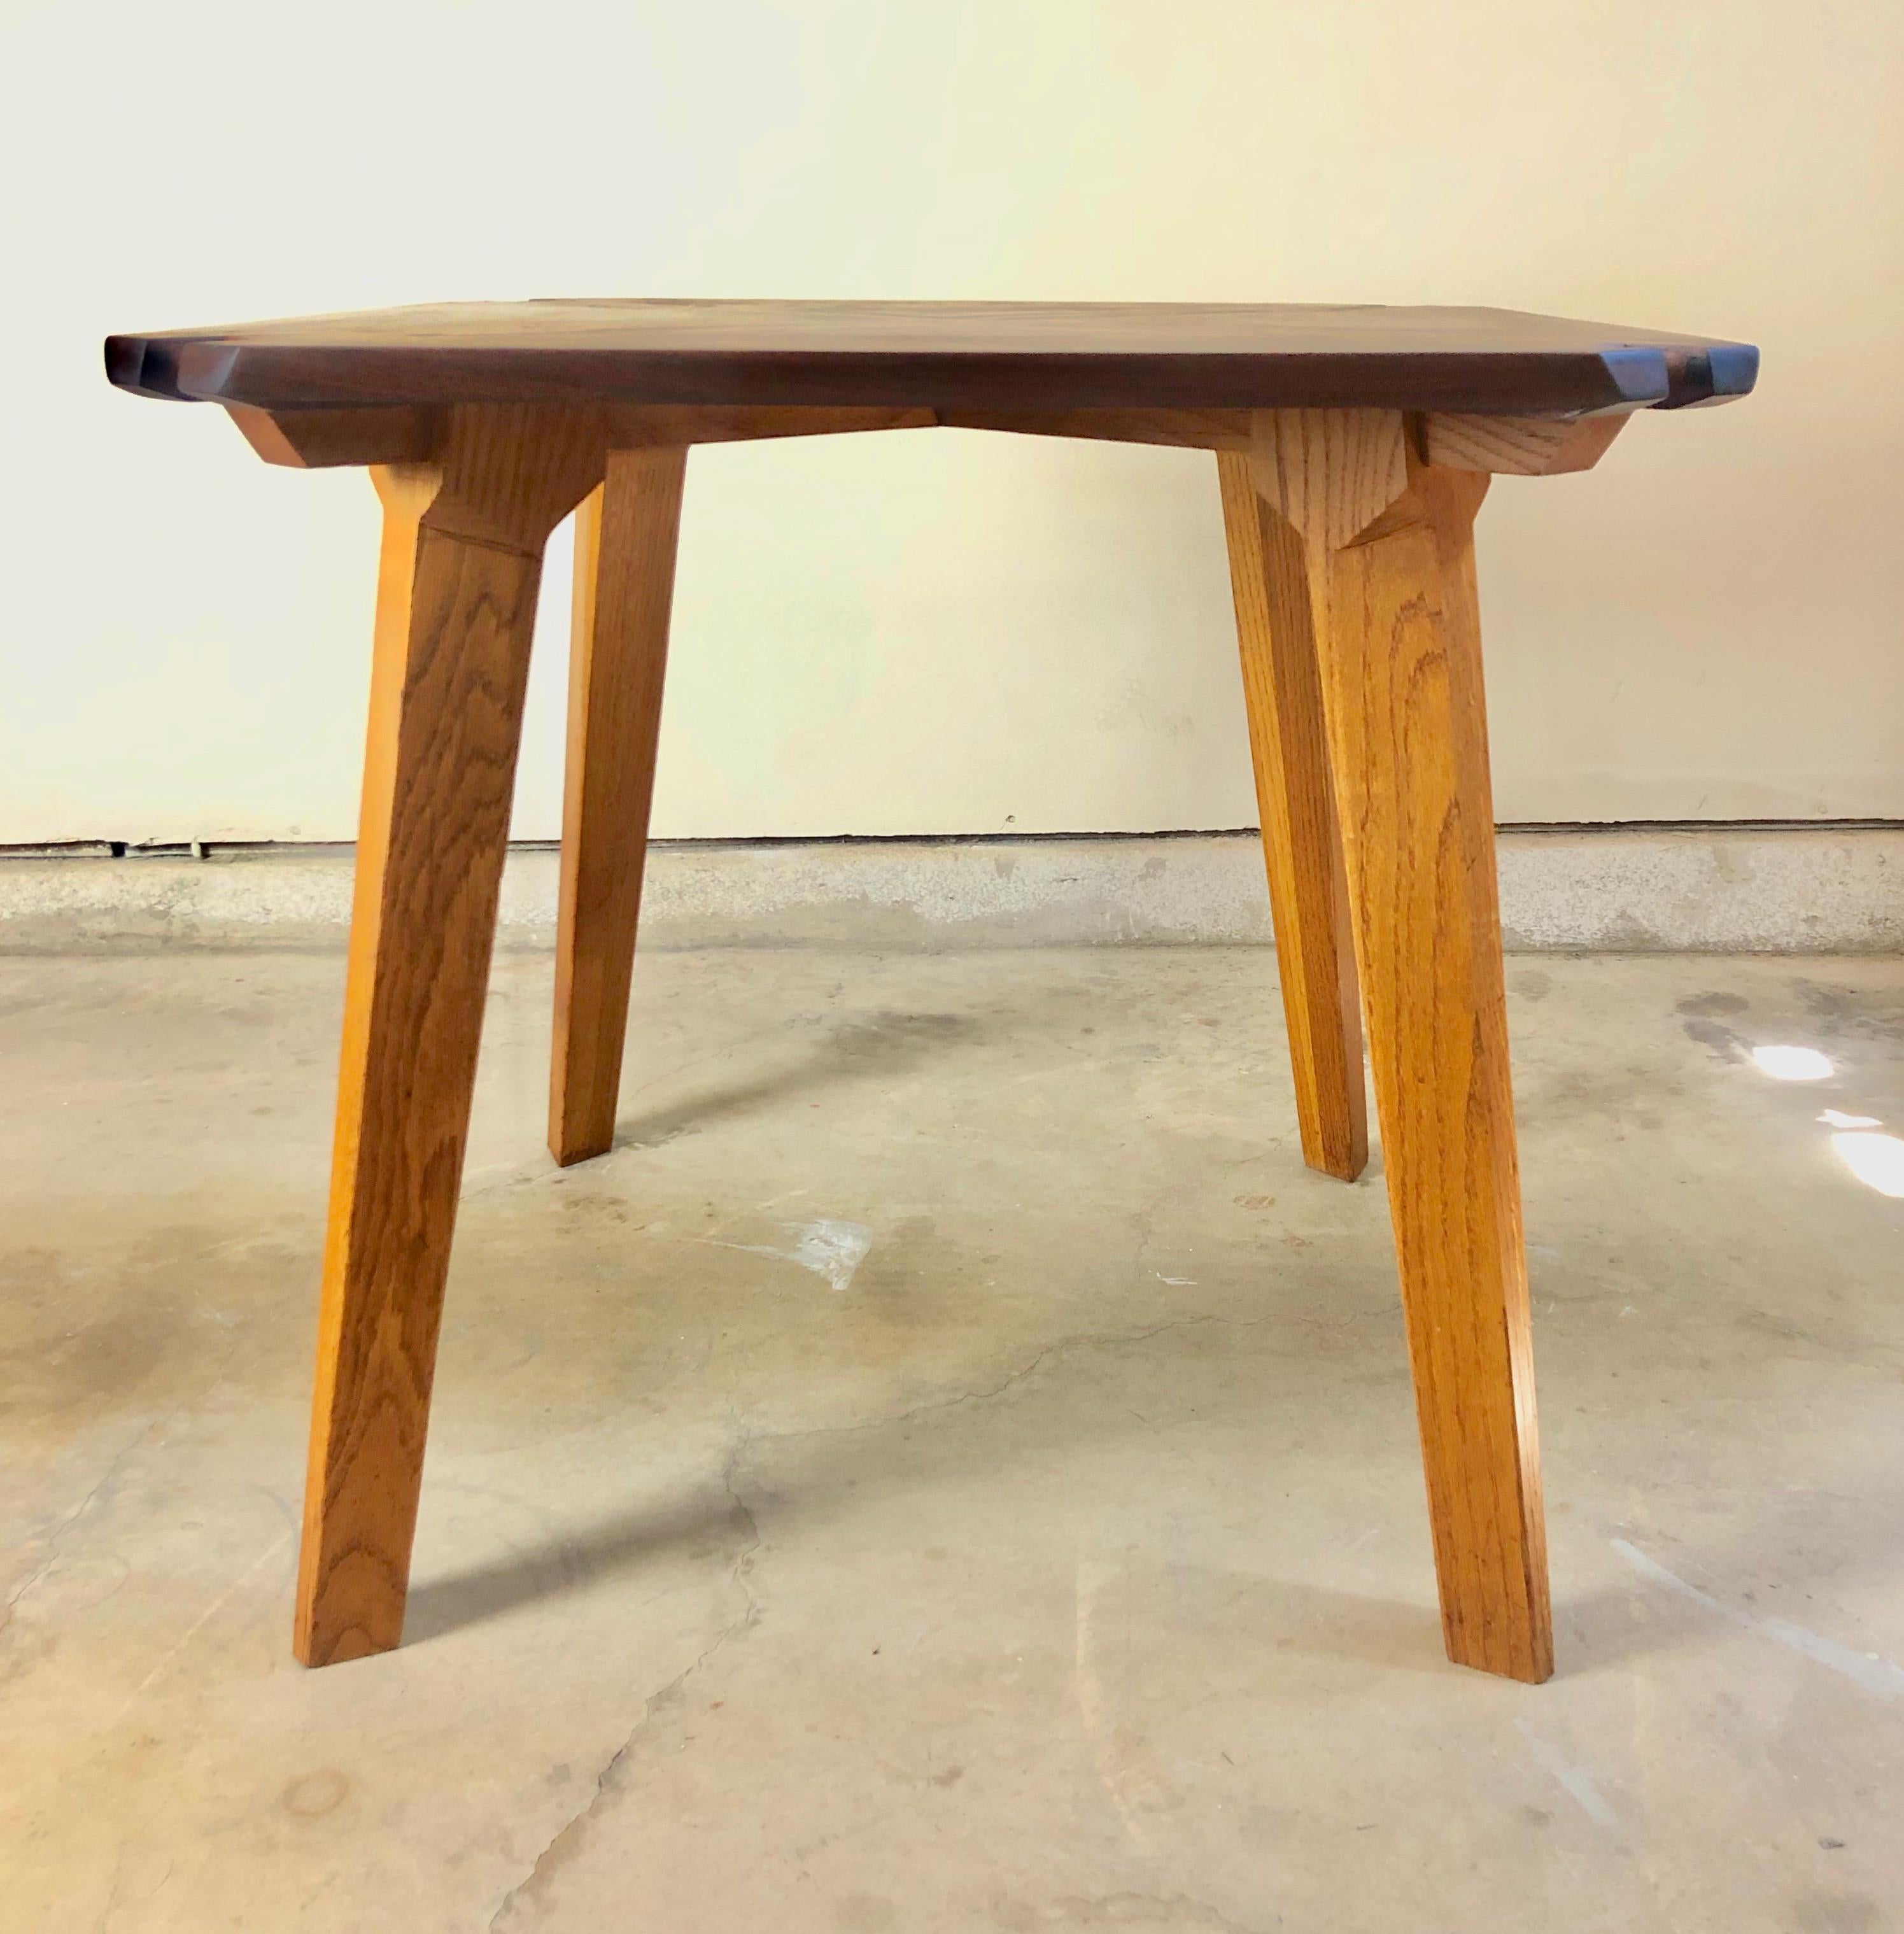 Studio crafted mixed woods dining table. Petite sized dining table that can also be used as a game table. This table fits perfectly into small spaces.